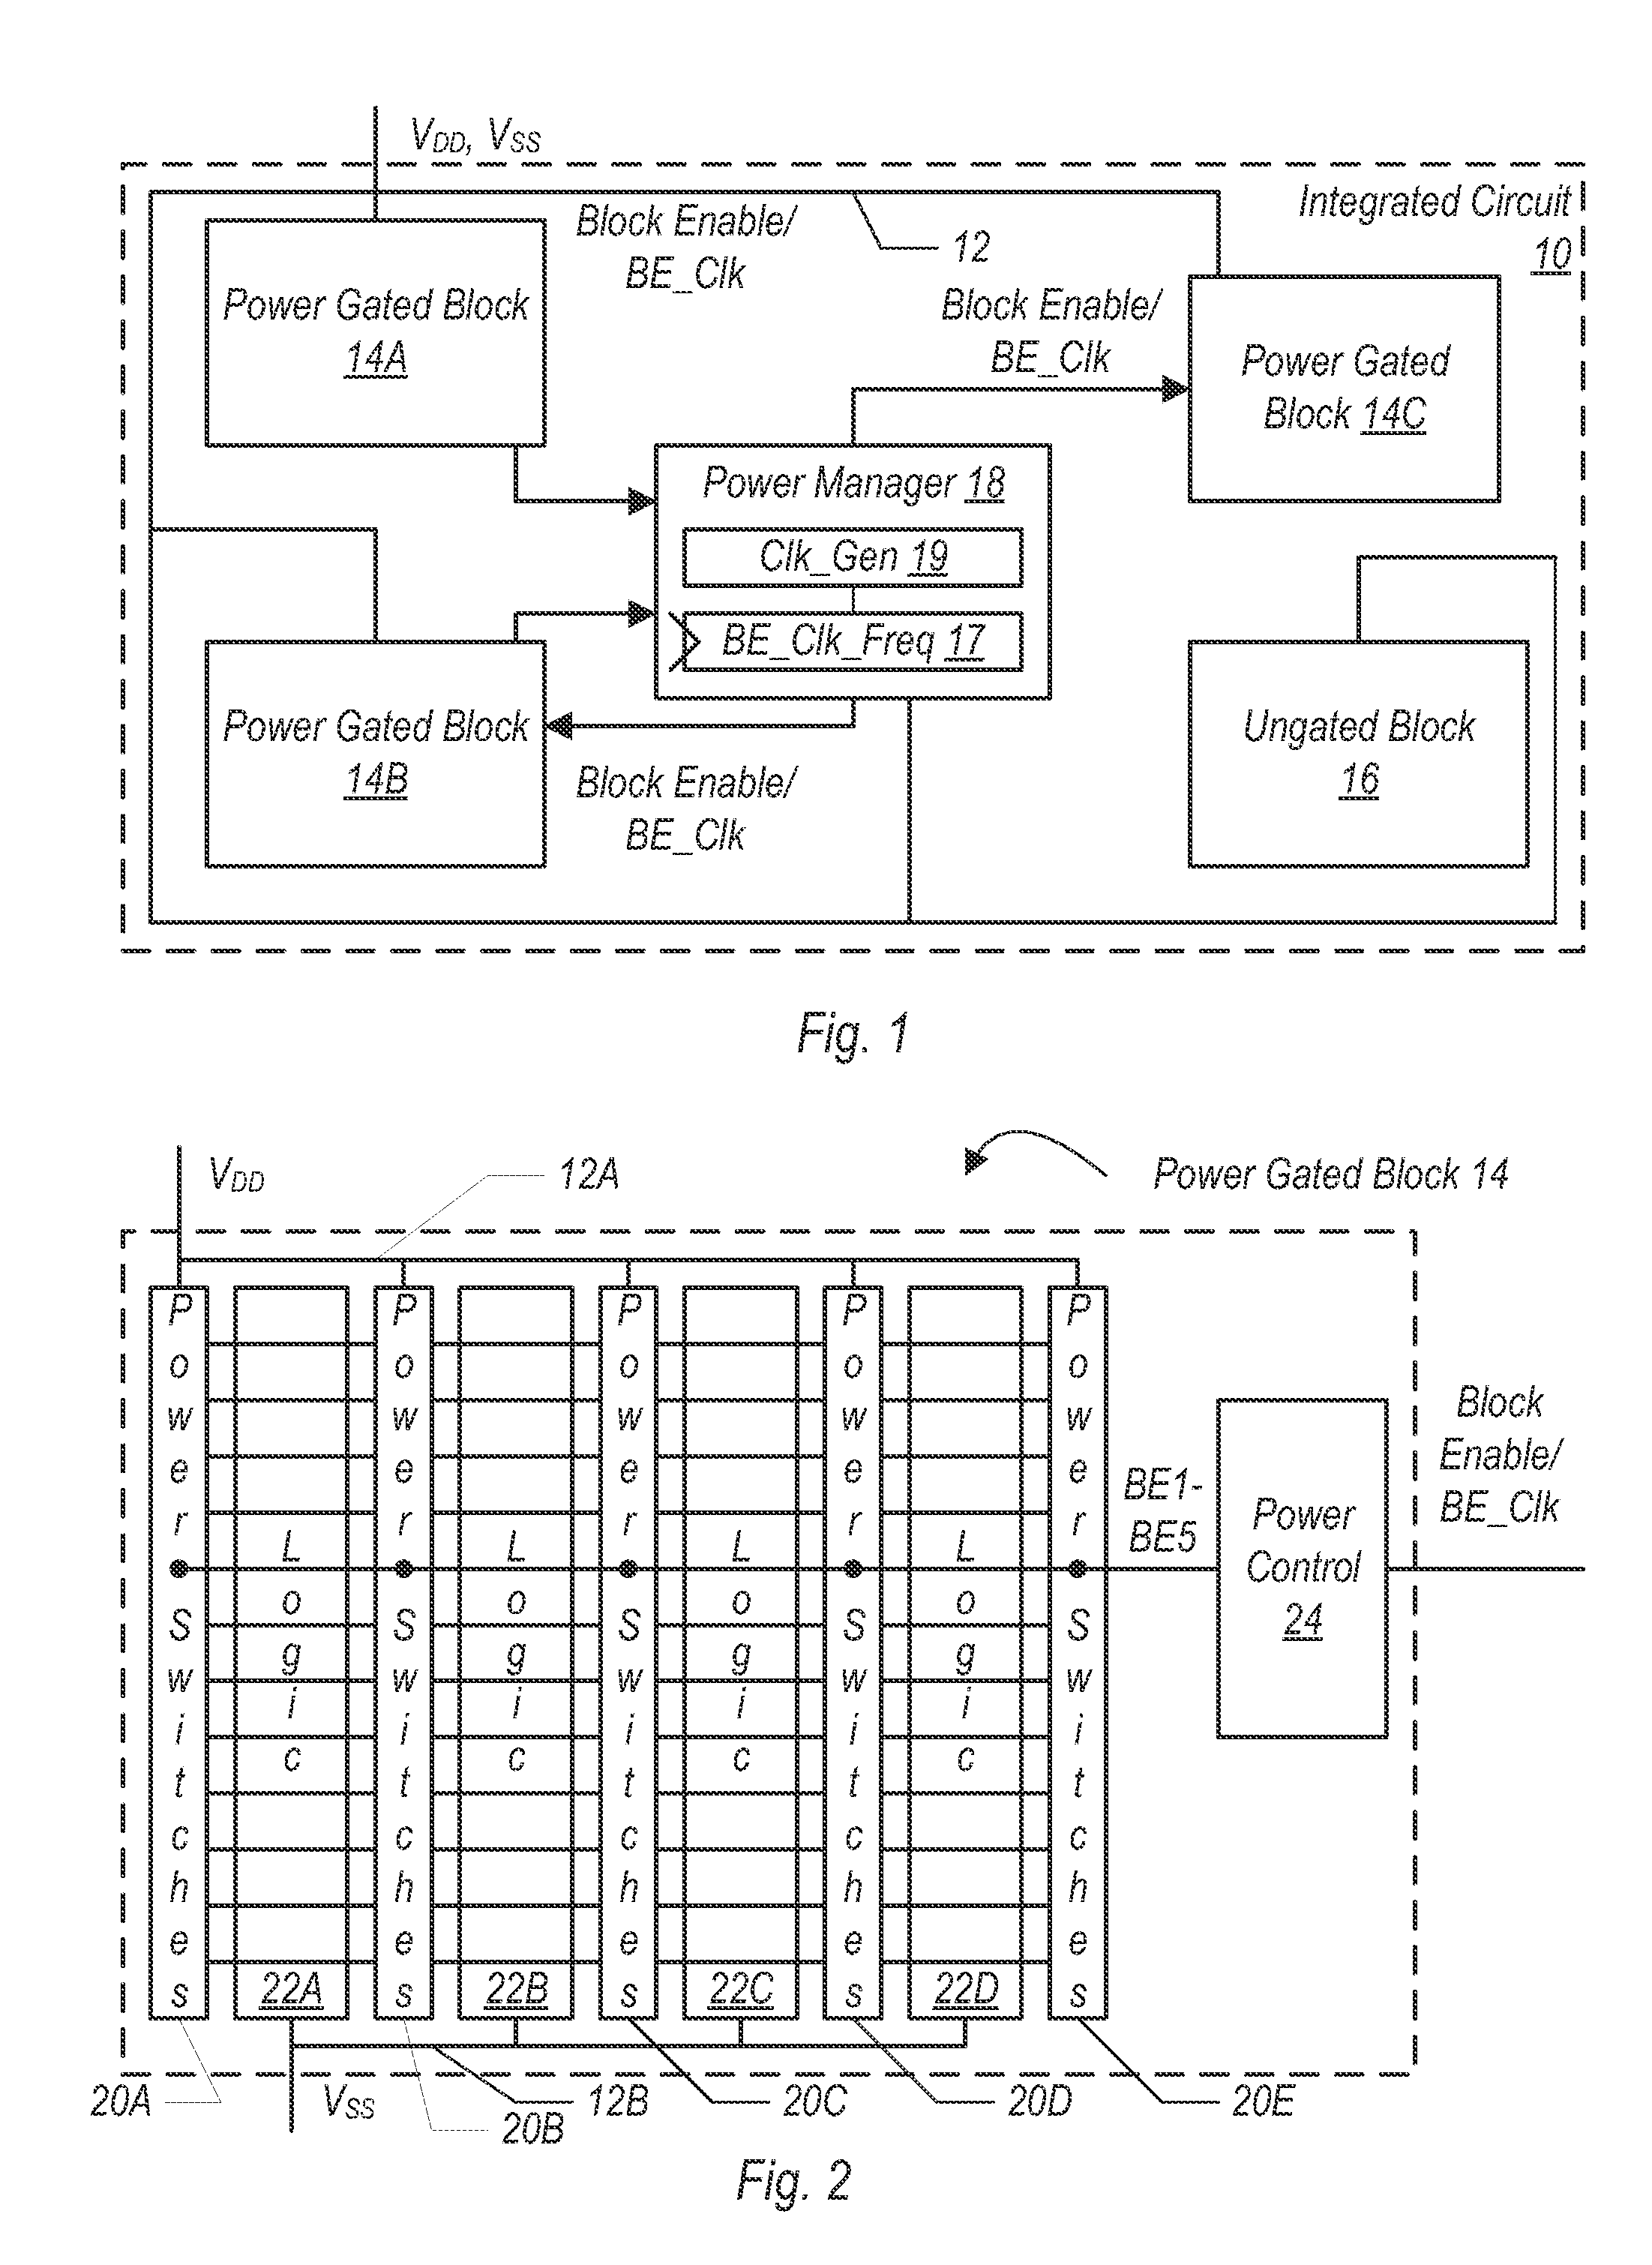 Multi-path power switch scheme for functional block wakeup